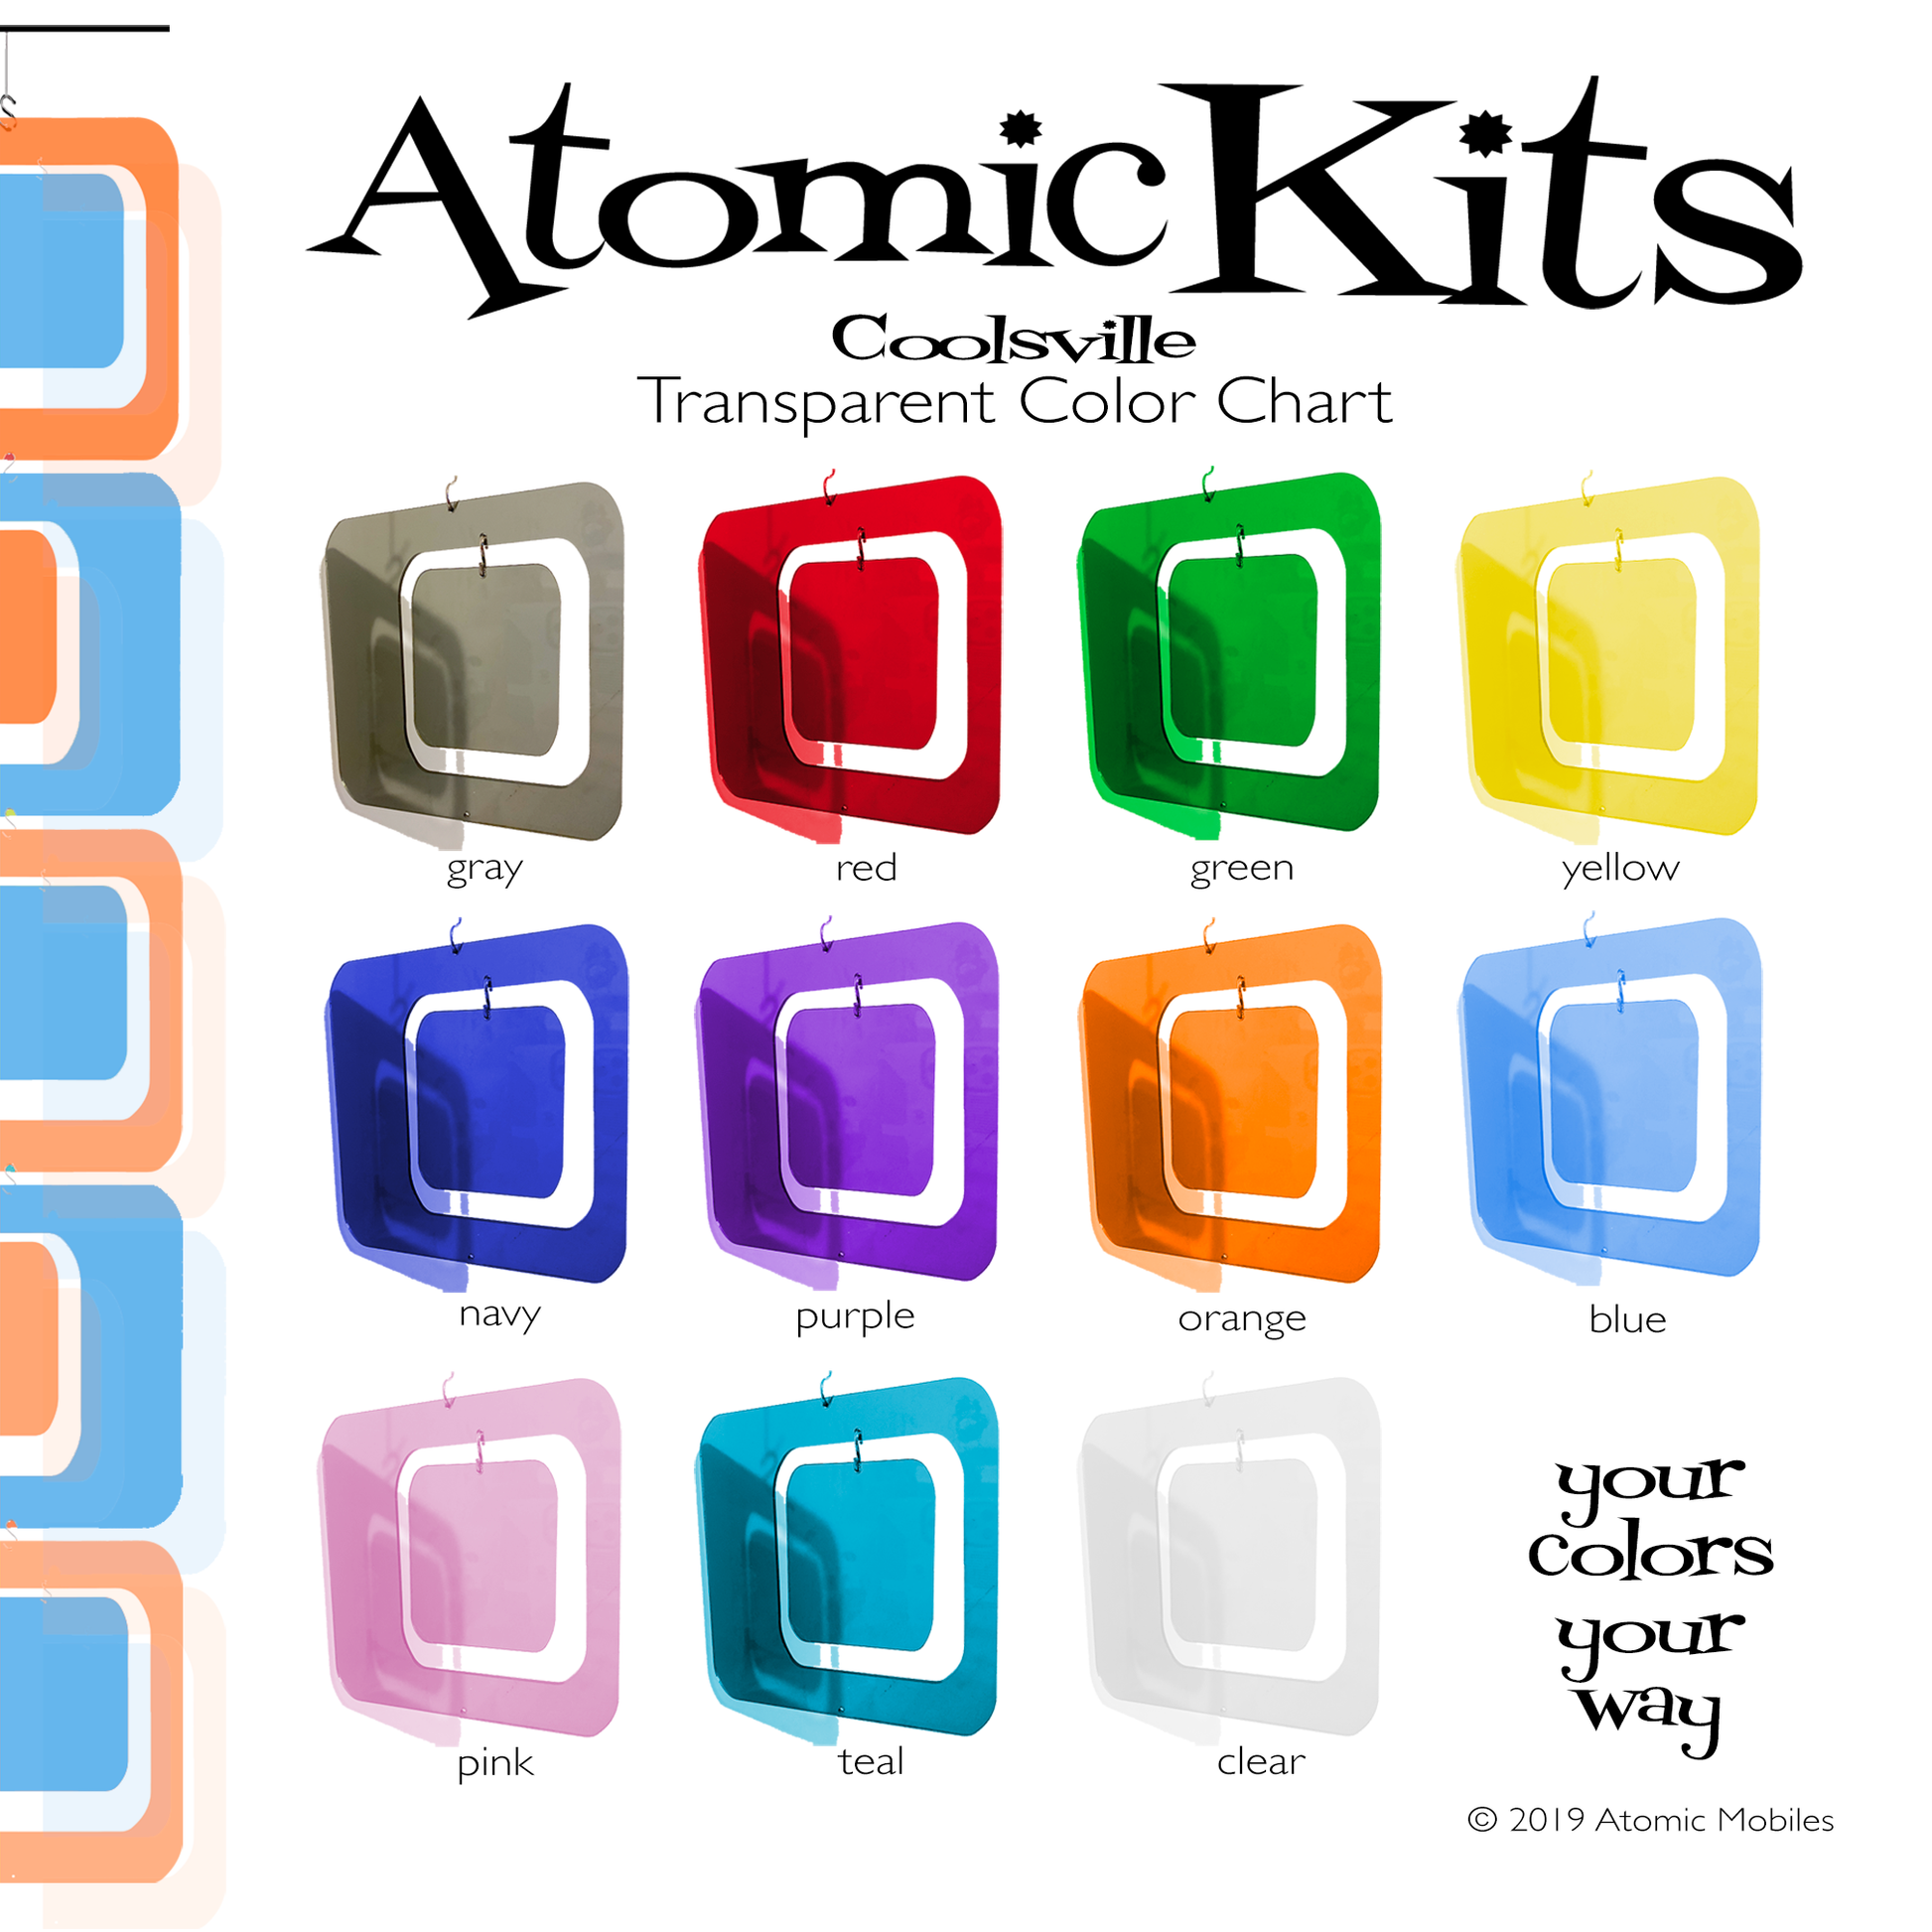 Coolsville Atomic Kits Transparent Color Chart by AtomicMobiles.com